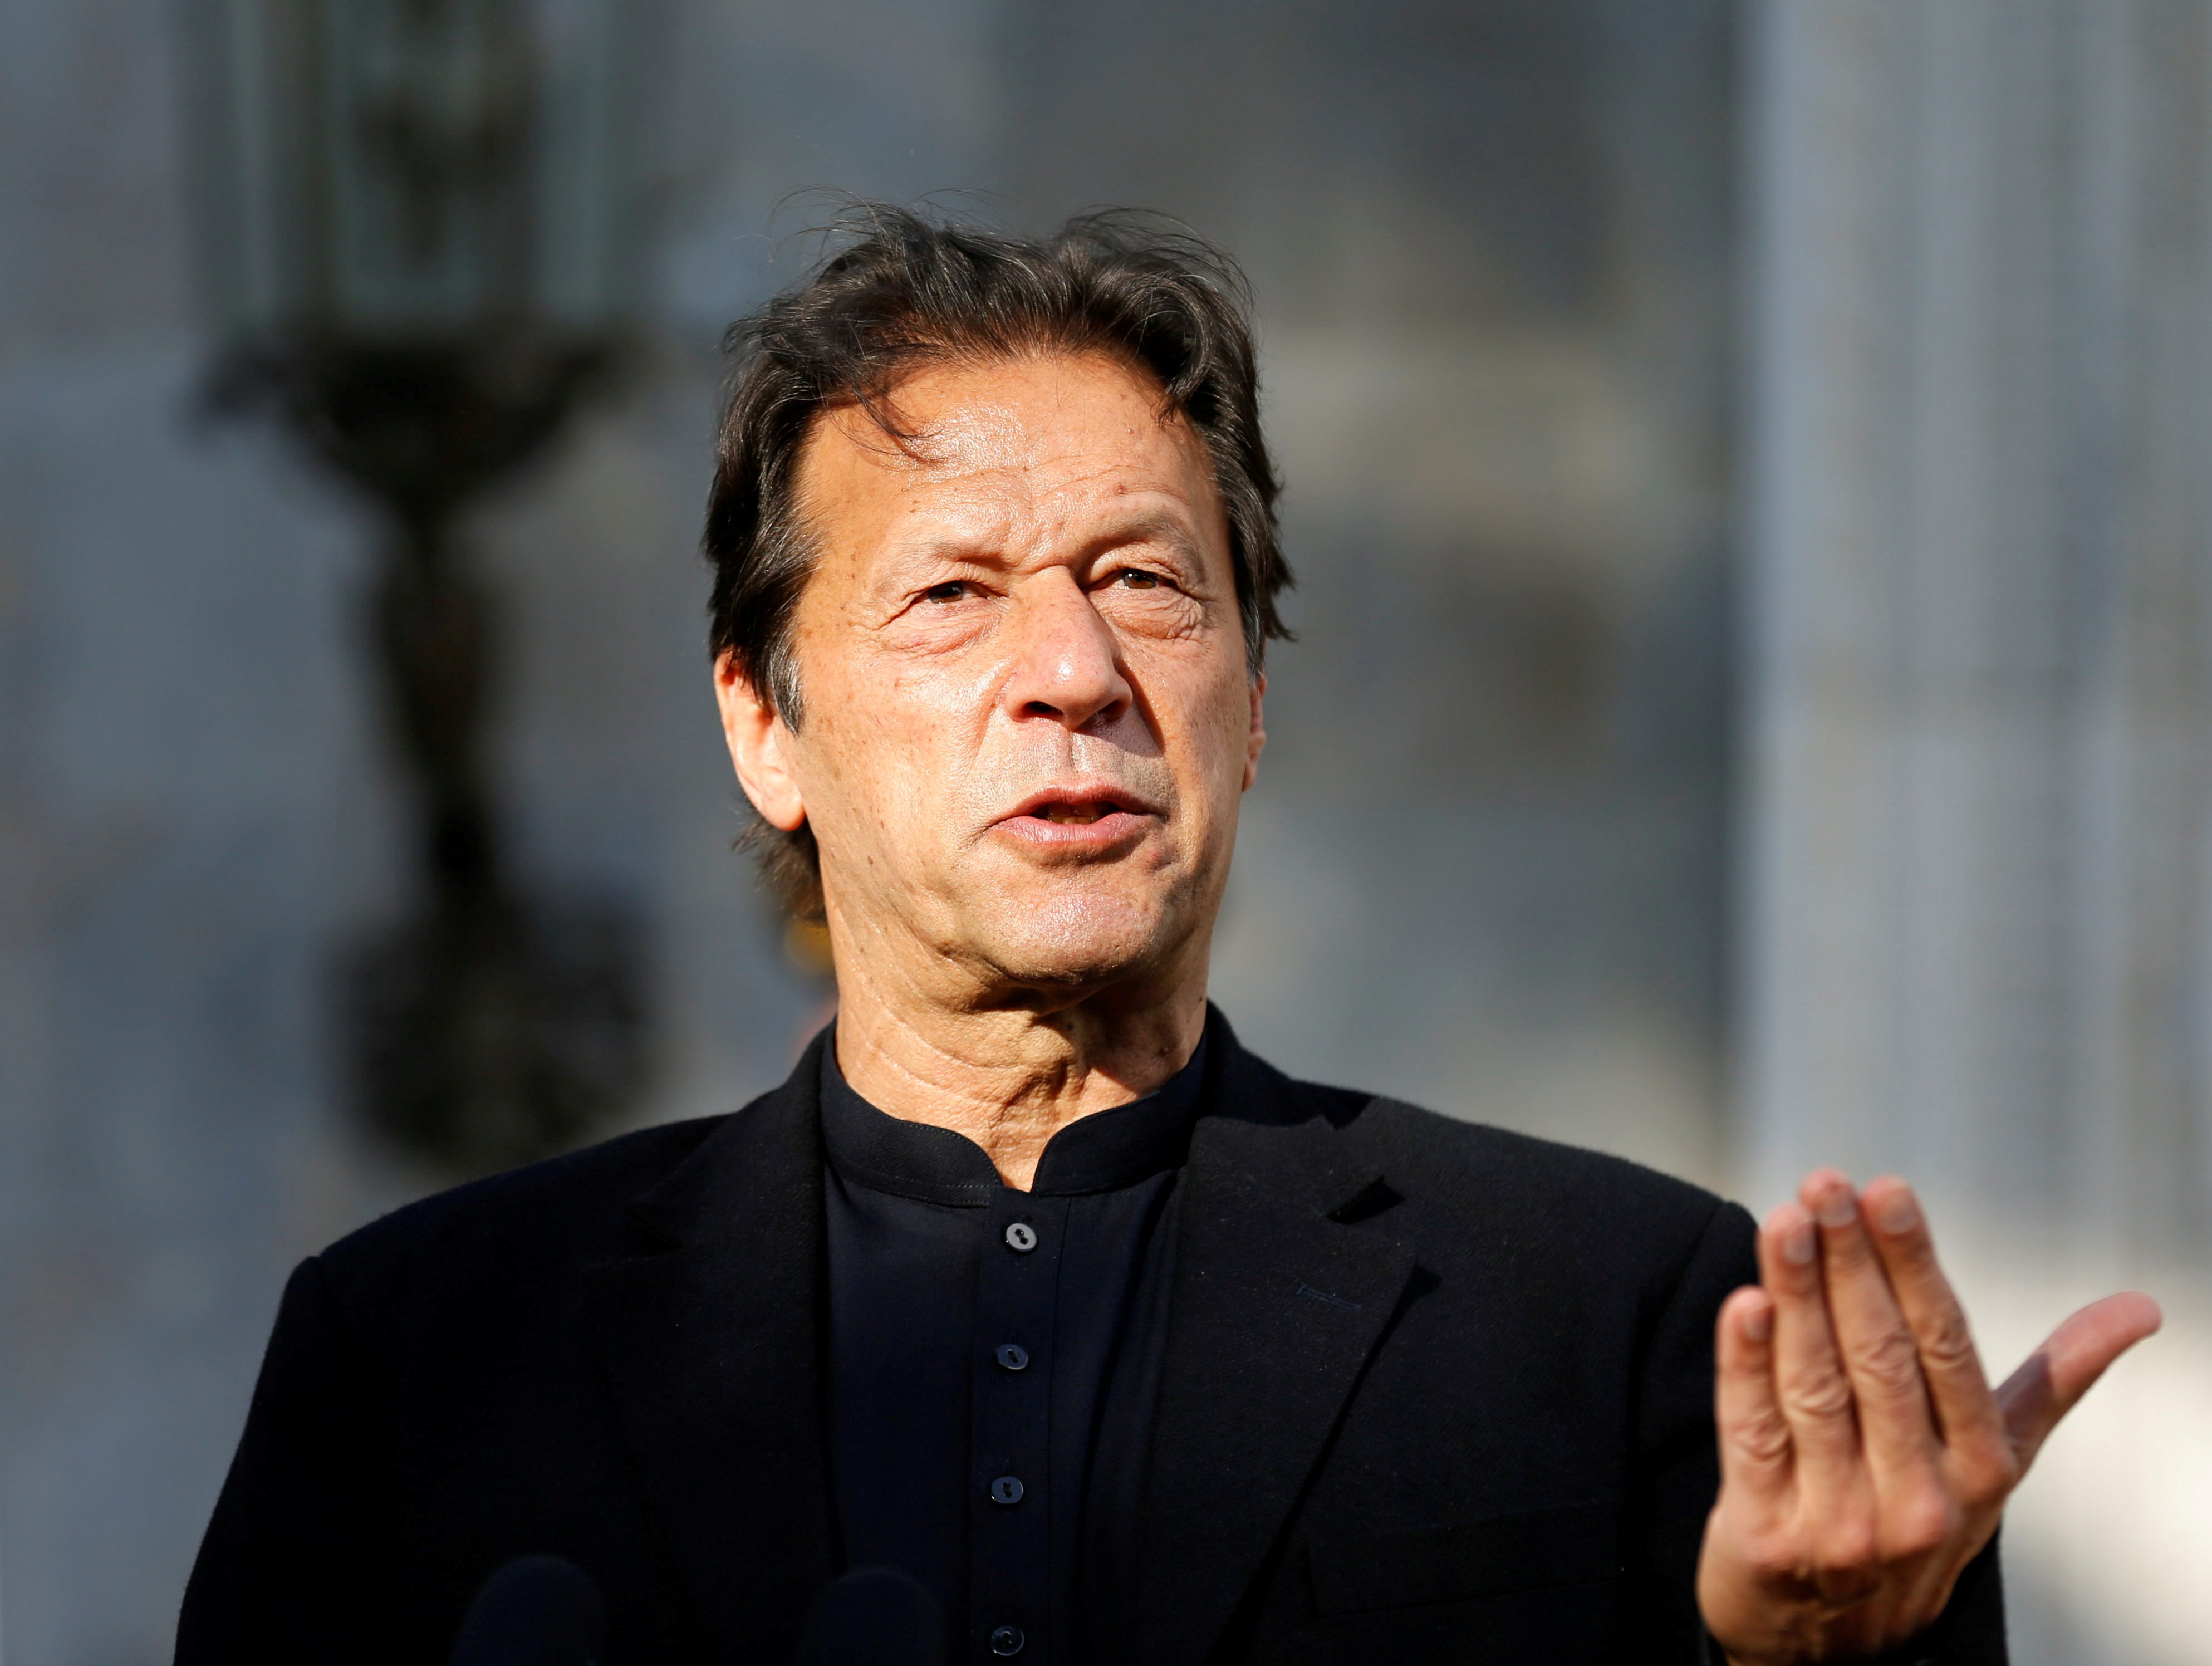 Pakistan Prime Minister Khan criticized over meeting as COVID-19 cases rise